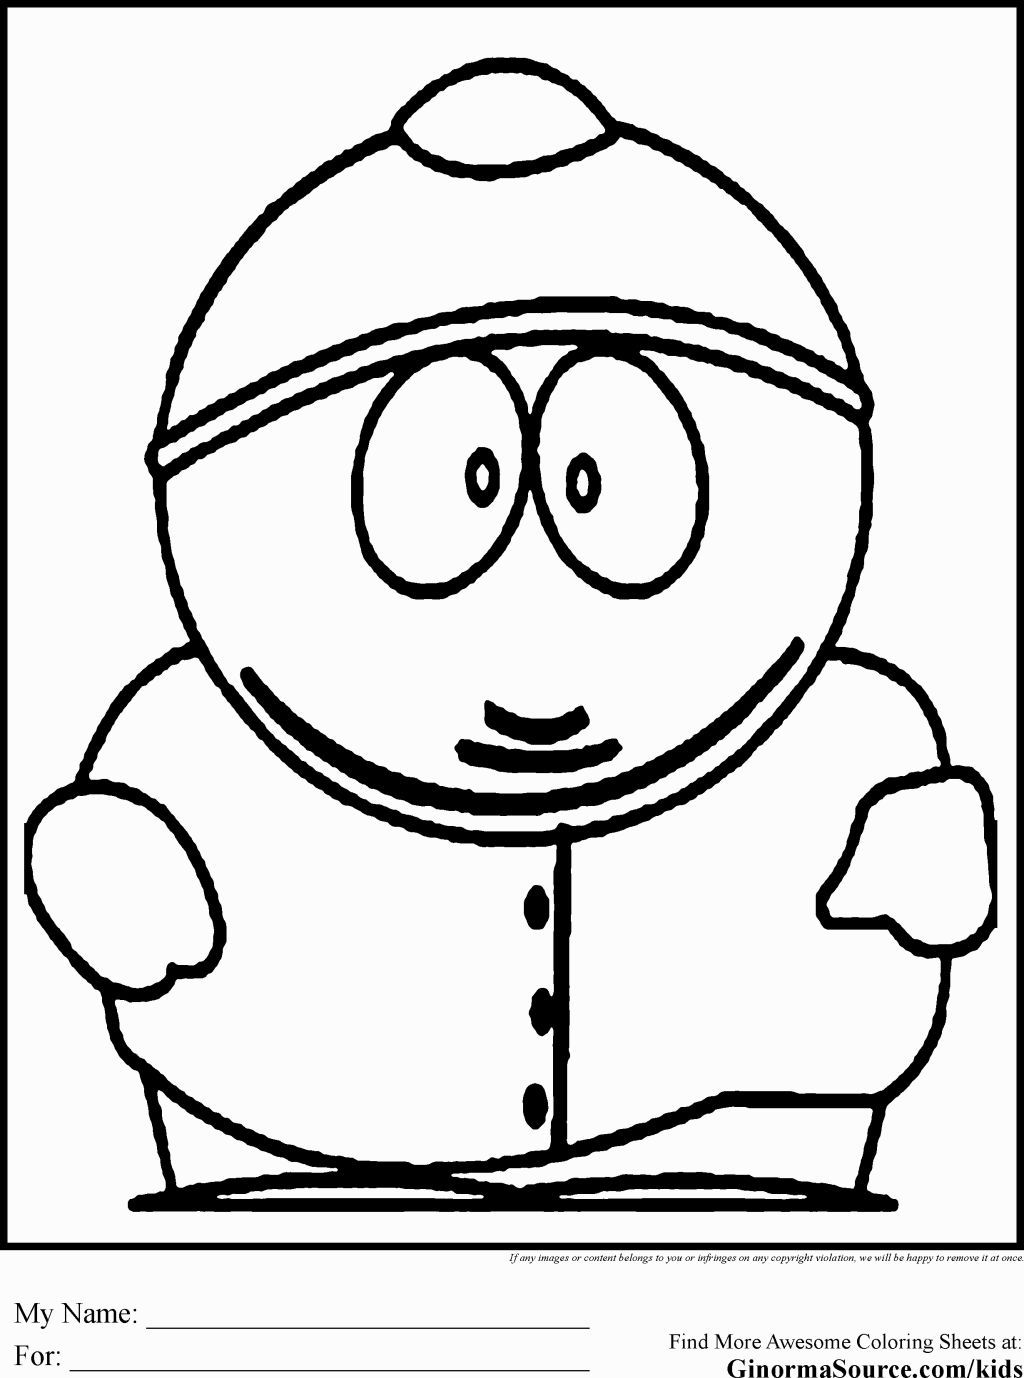 Owl Coloring Pages Printable | Coloring Pages